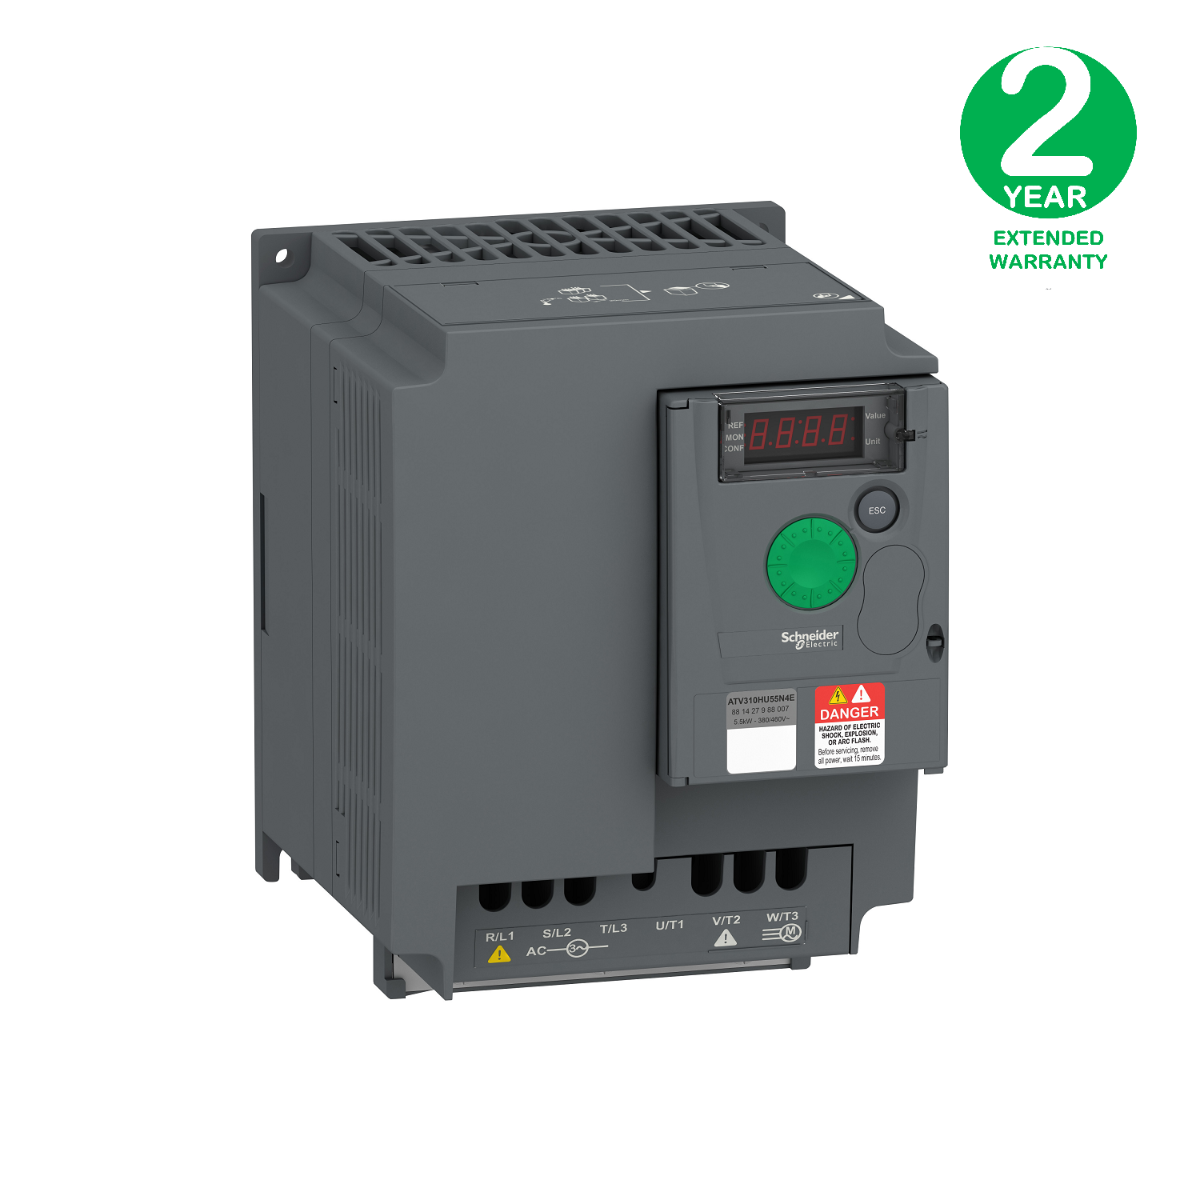 variable speed drive ATV310, 5.5 kW, 7.5 hp, 380...460 V, 3 phase, without filter